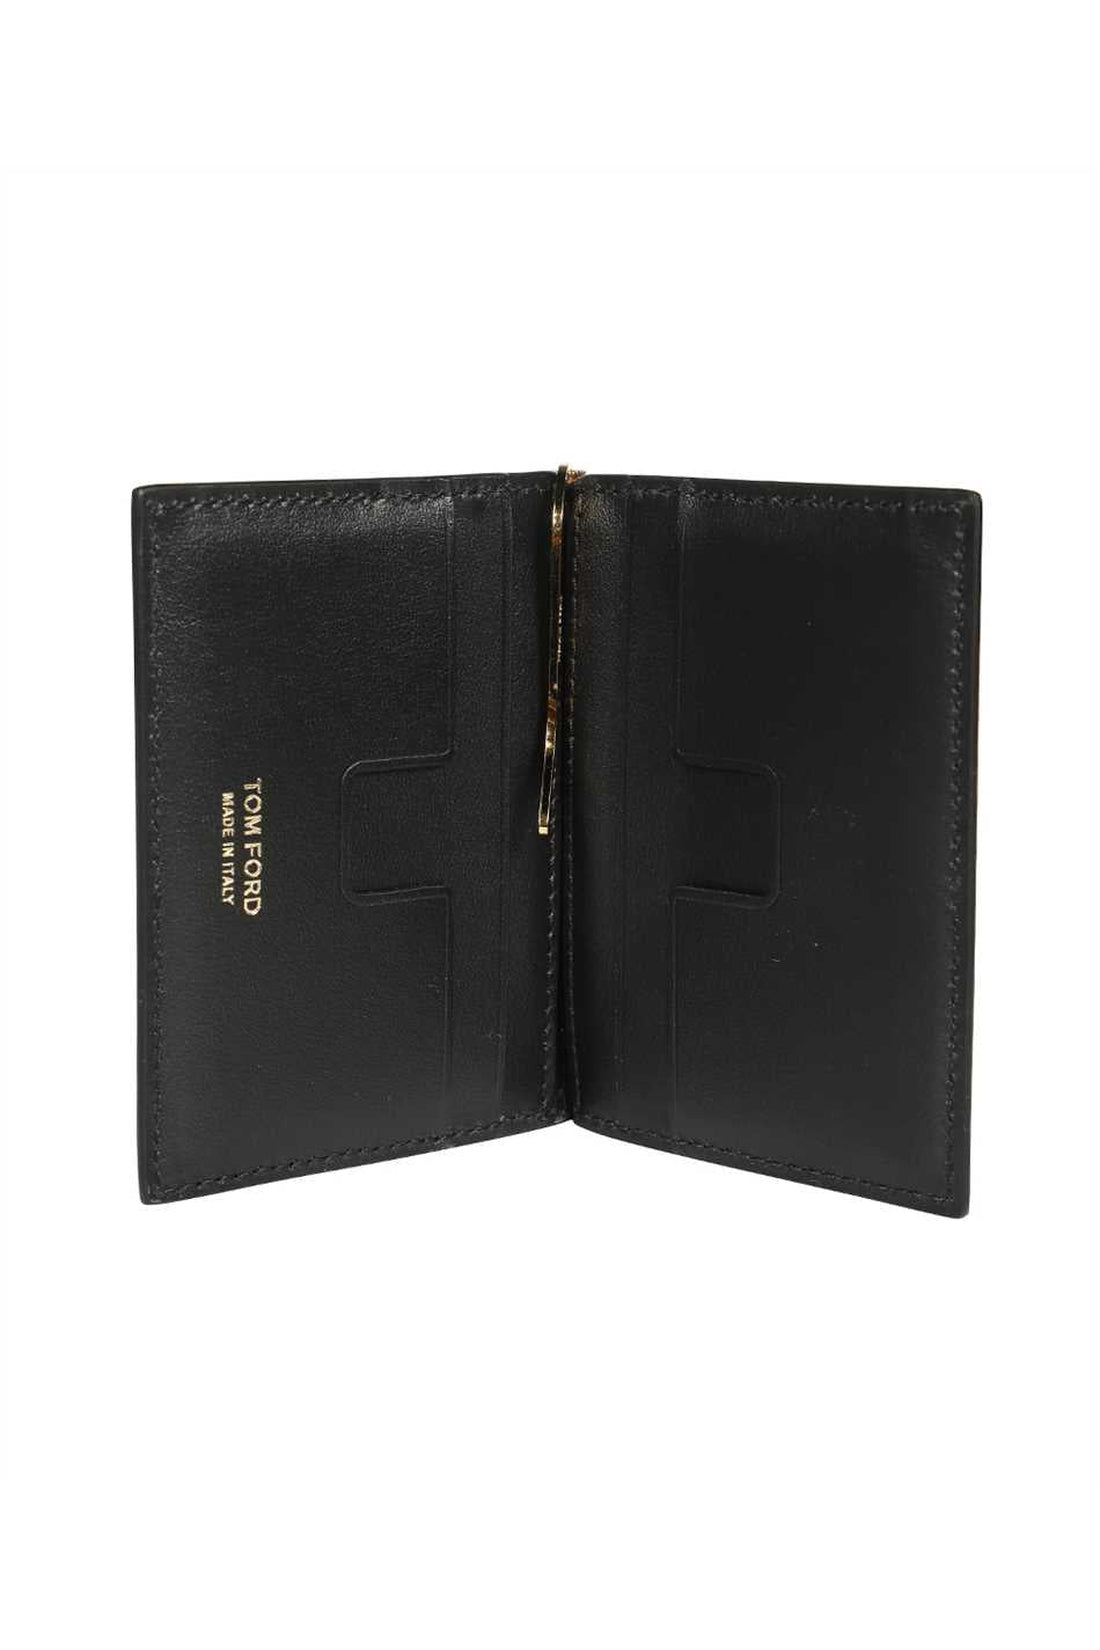 Tom Ford-OUTLET-SALE-Printed leather wallet-ARCHIVIST